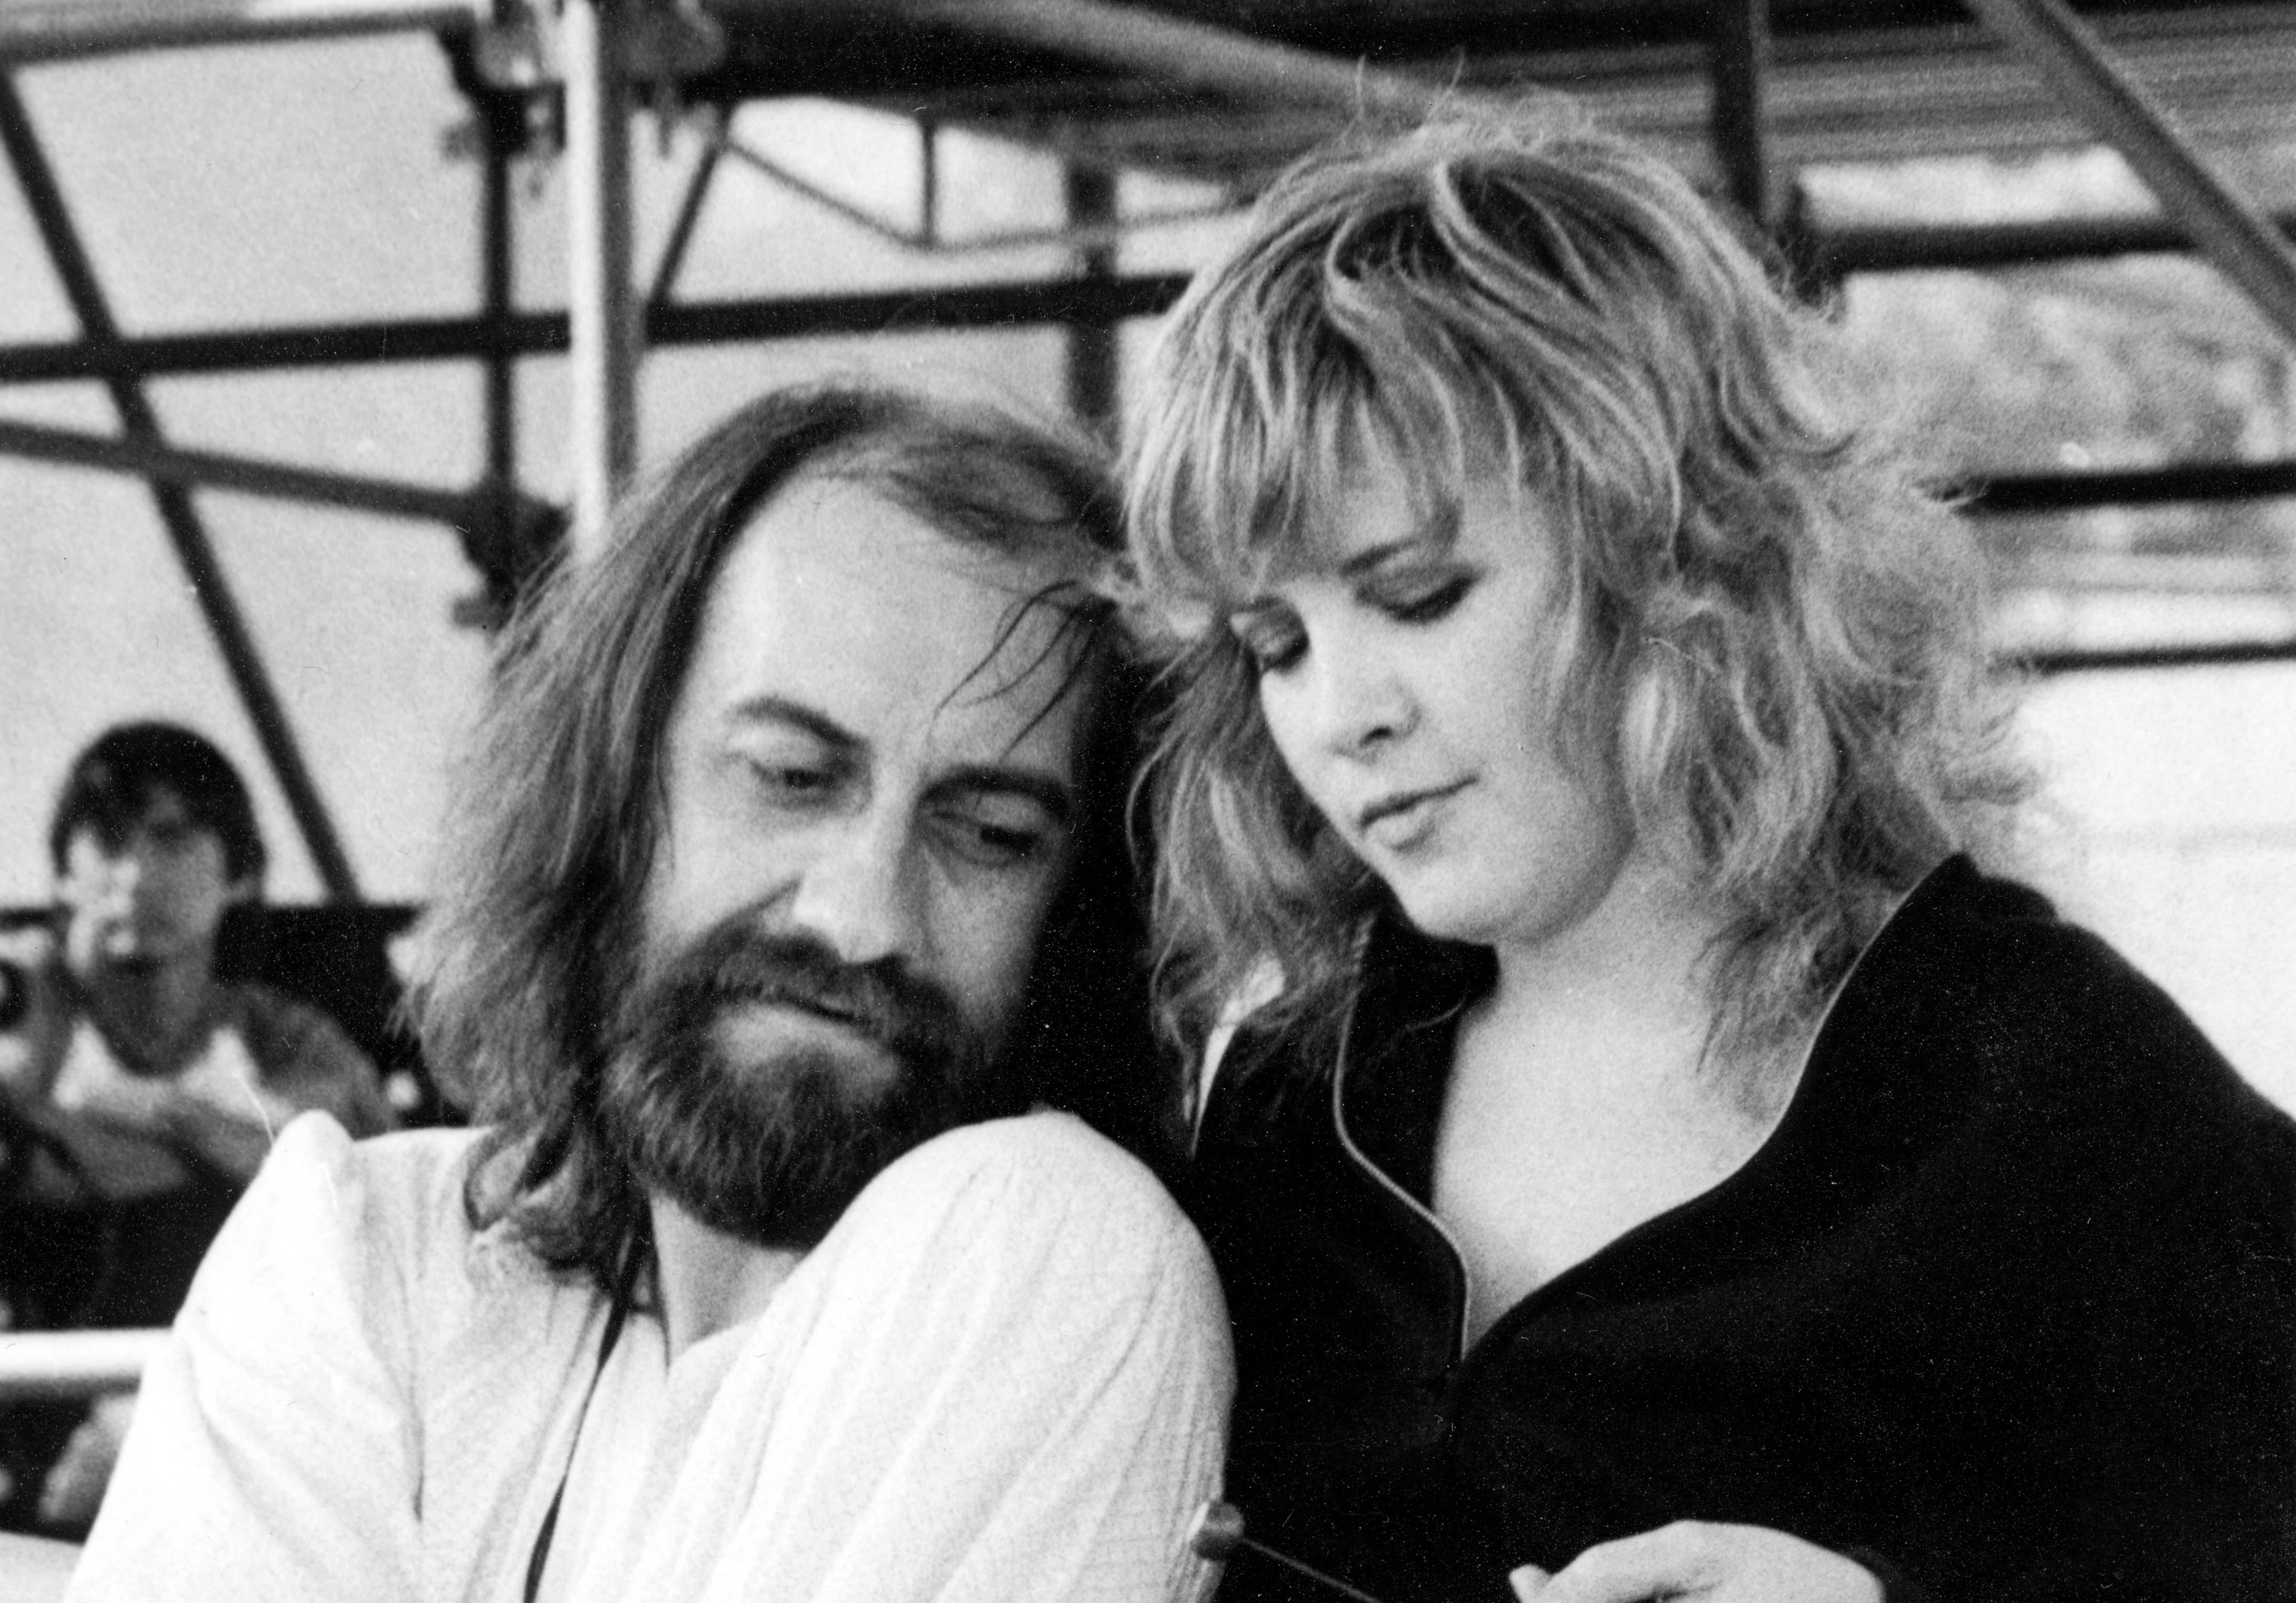 Mick Fleetwood sits and wears a white shirt. Stevie Nicks wears a black shirt and stands behind him.